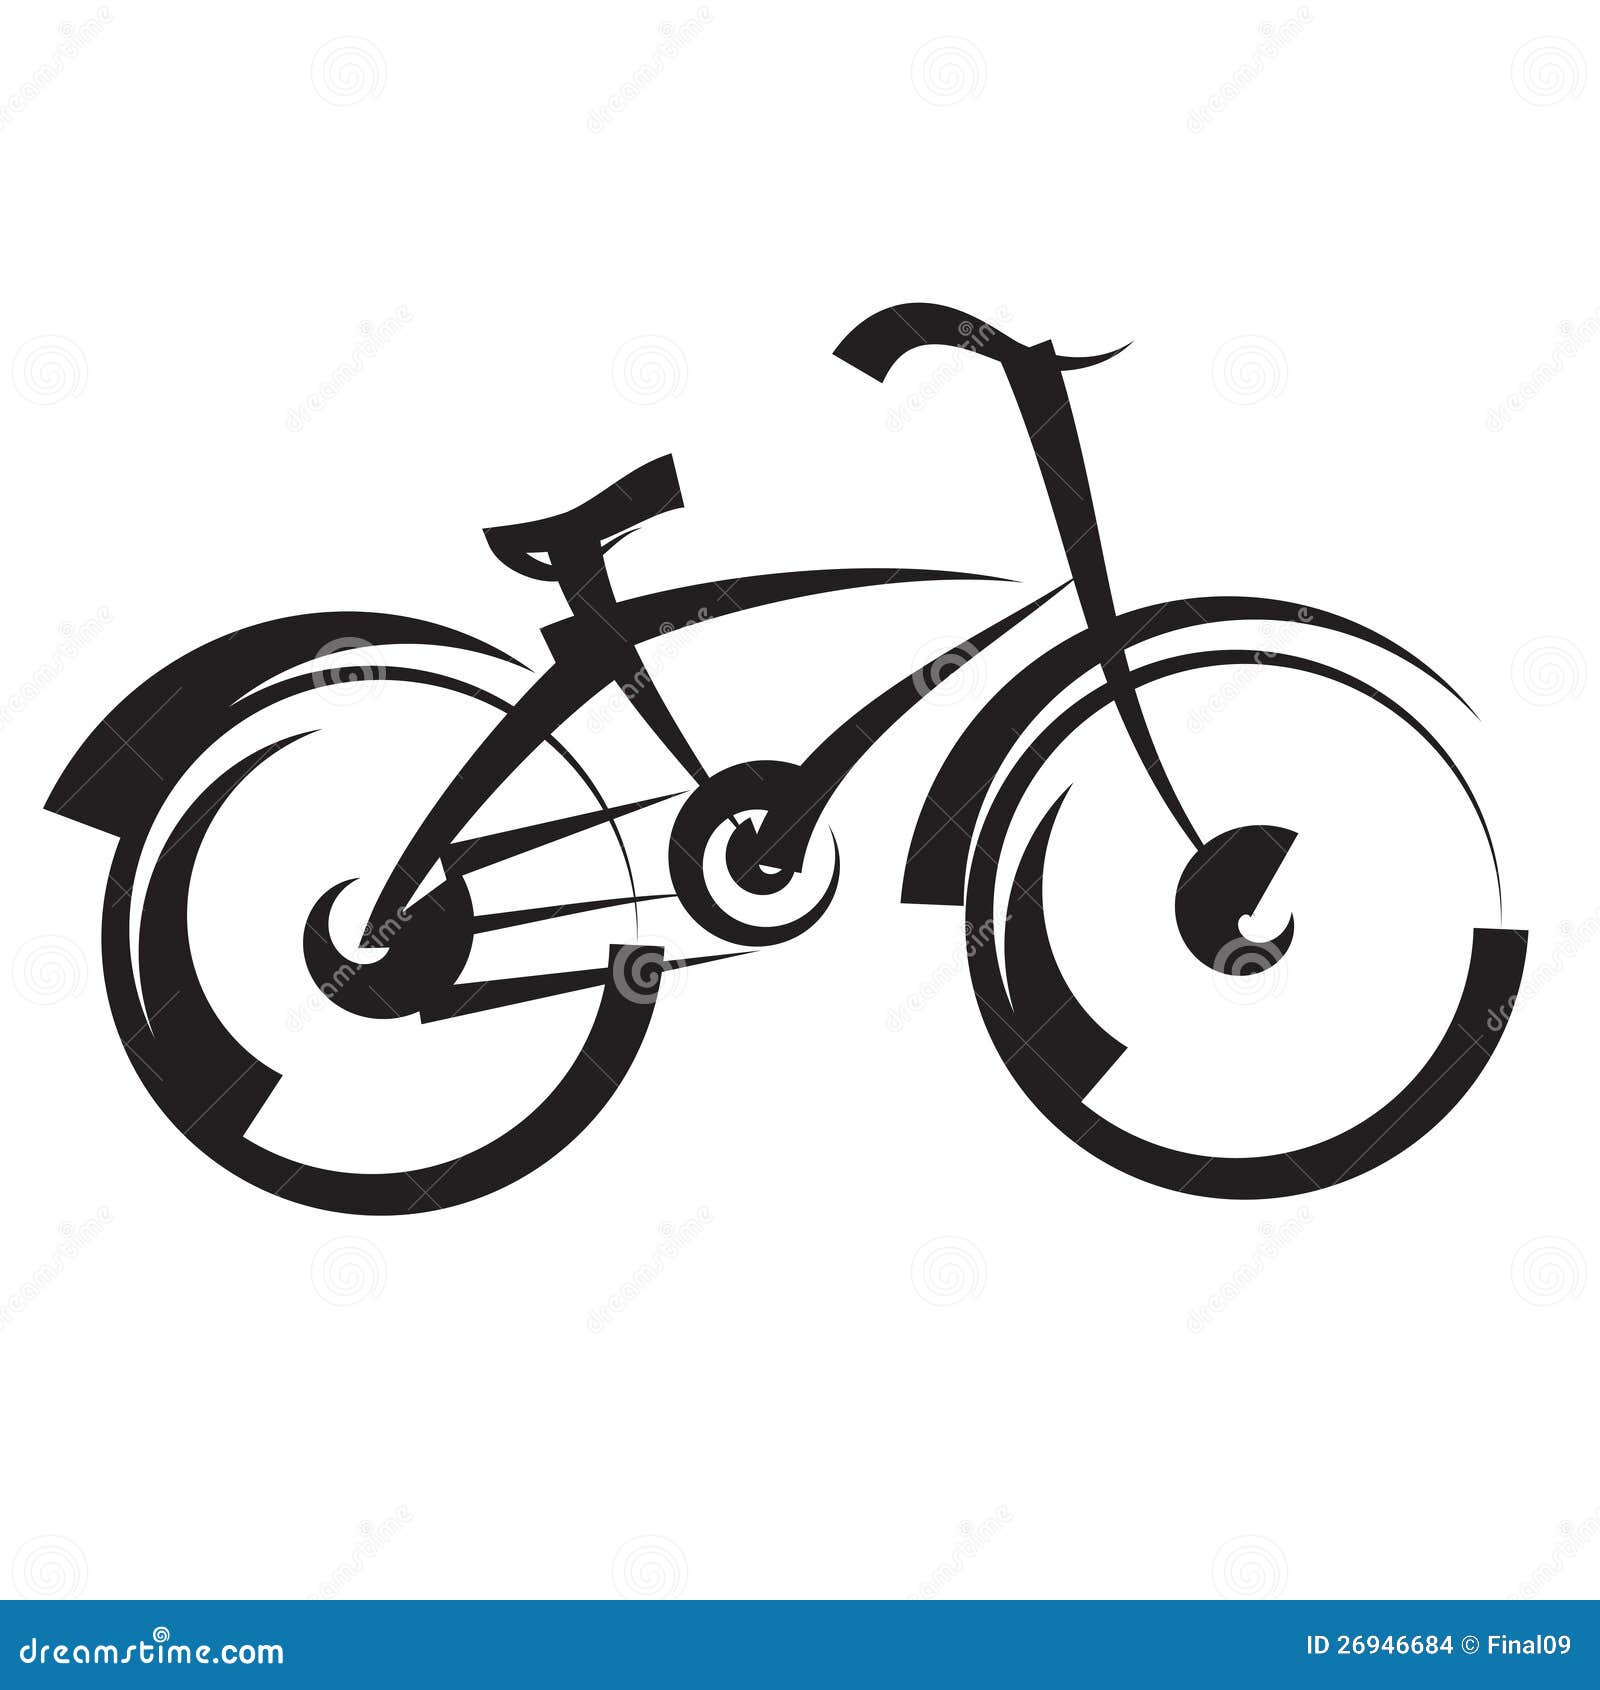 bicycle clipart black and white - photo #47